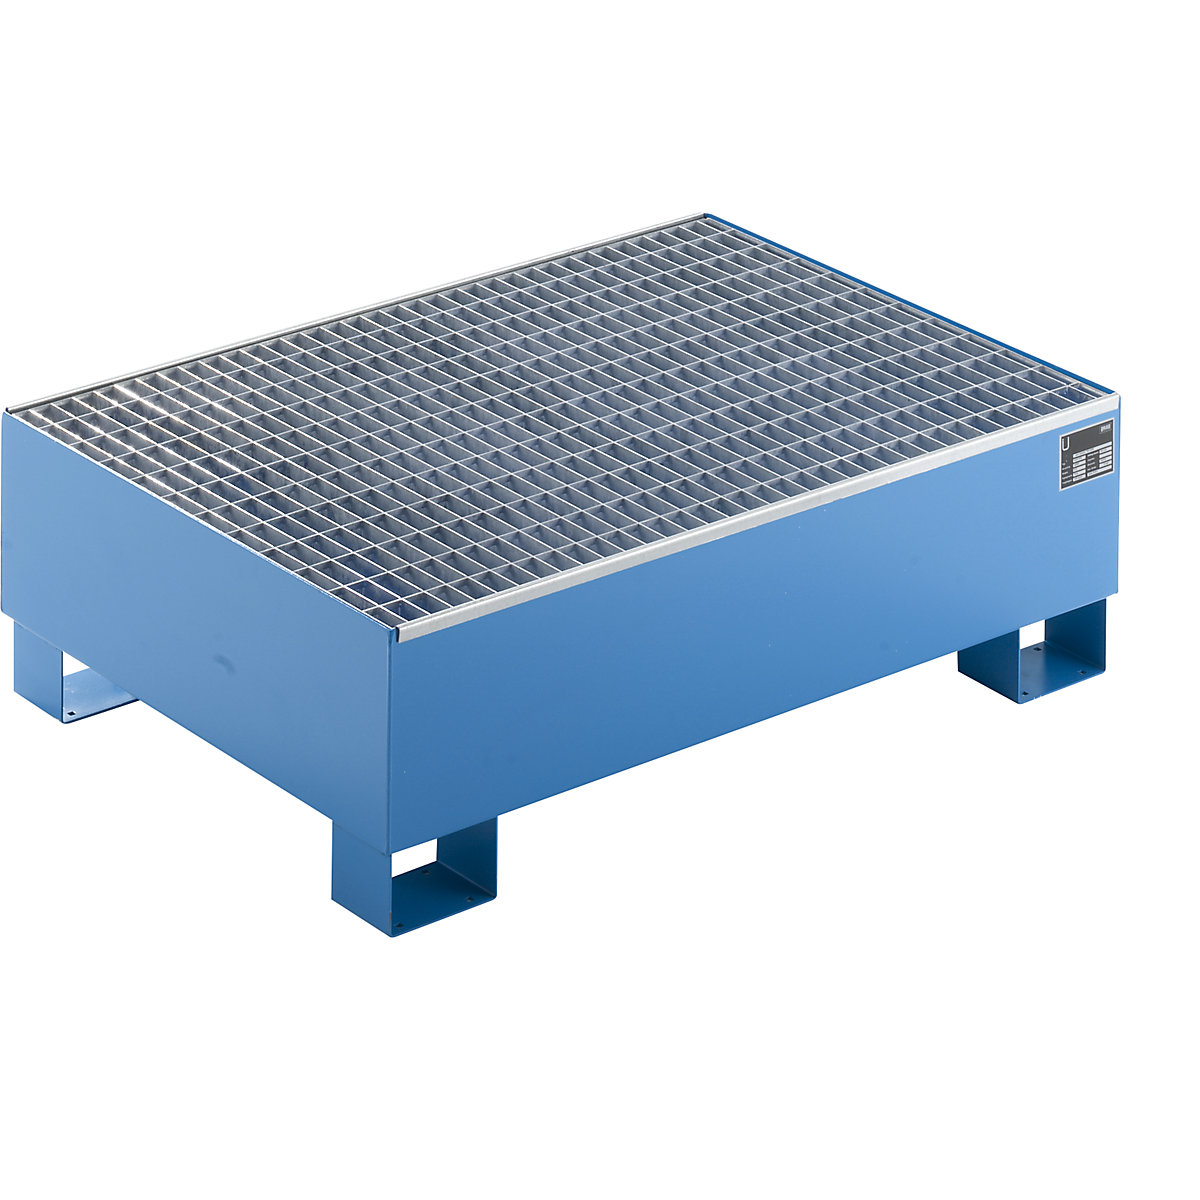 EUROKRAFTbasic – Sump tray made from sheet steel, LxWxH 1200 x 800 x 360 mm, blue RAL 5012, with grate